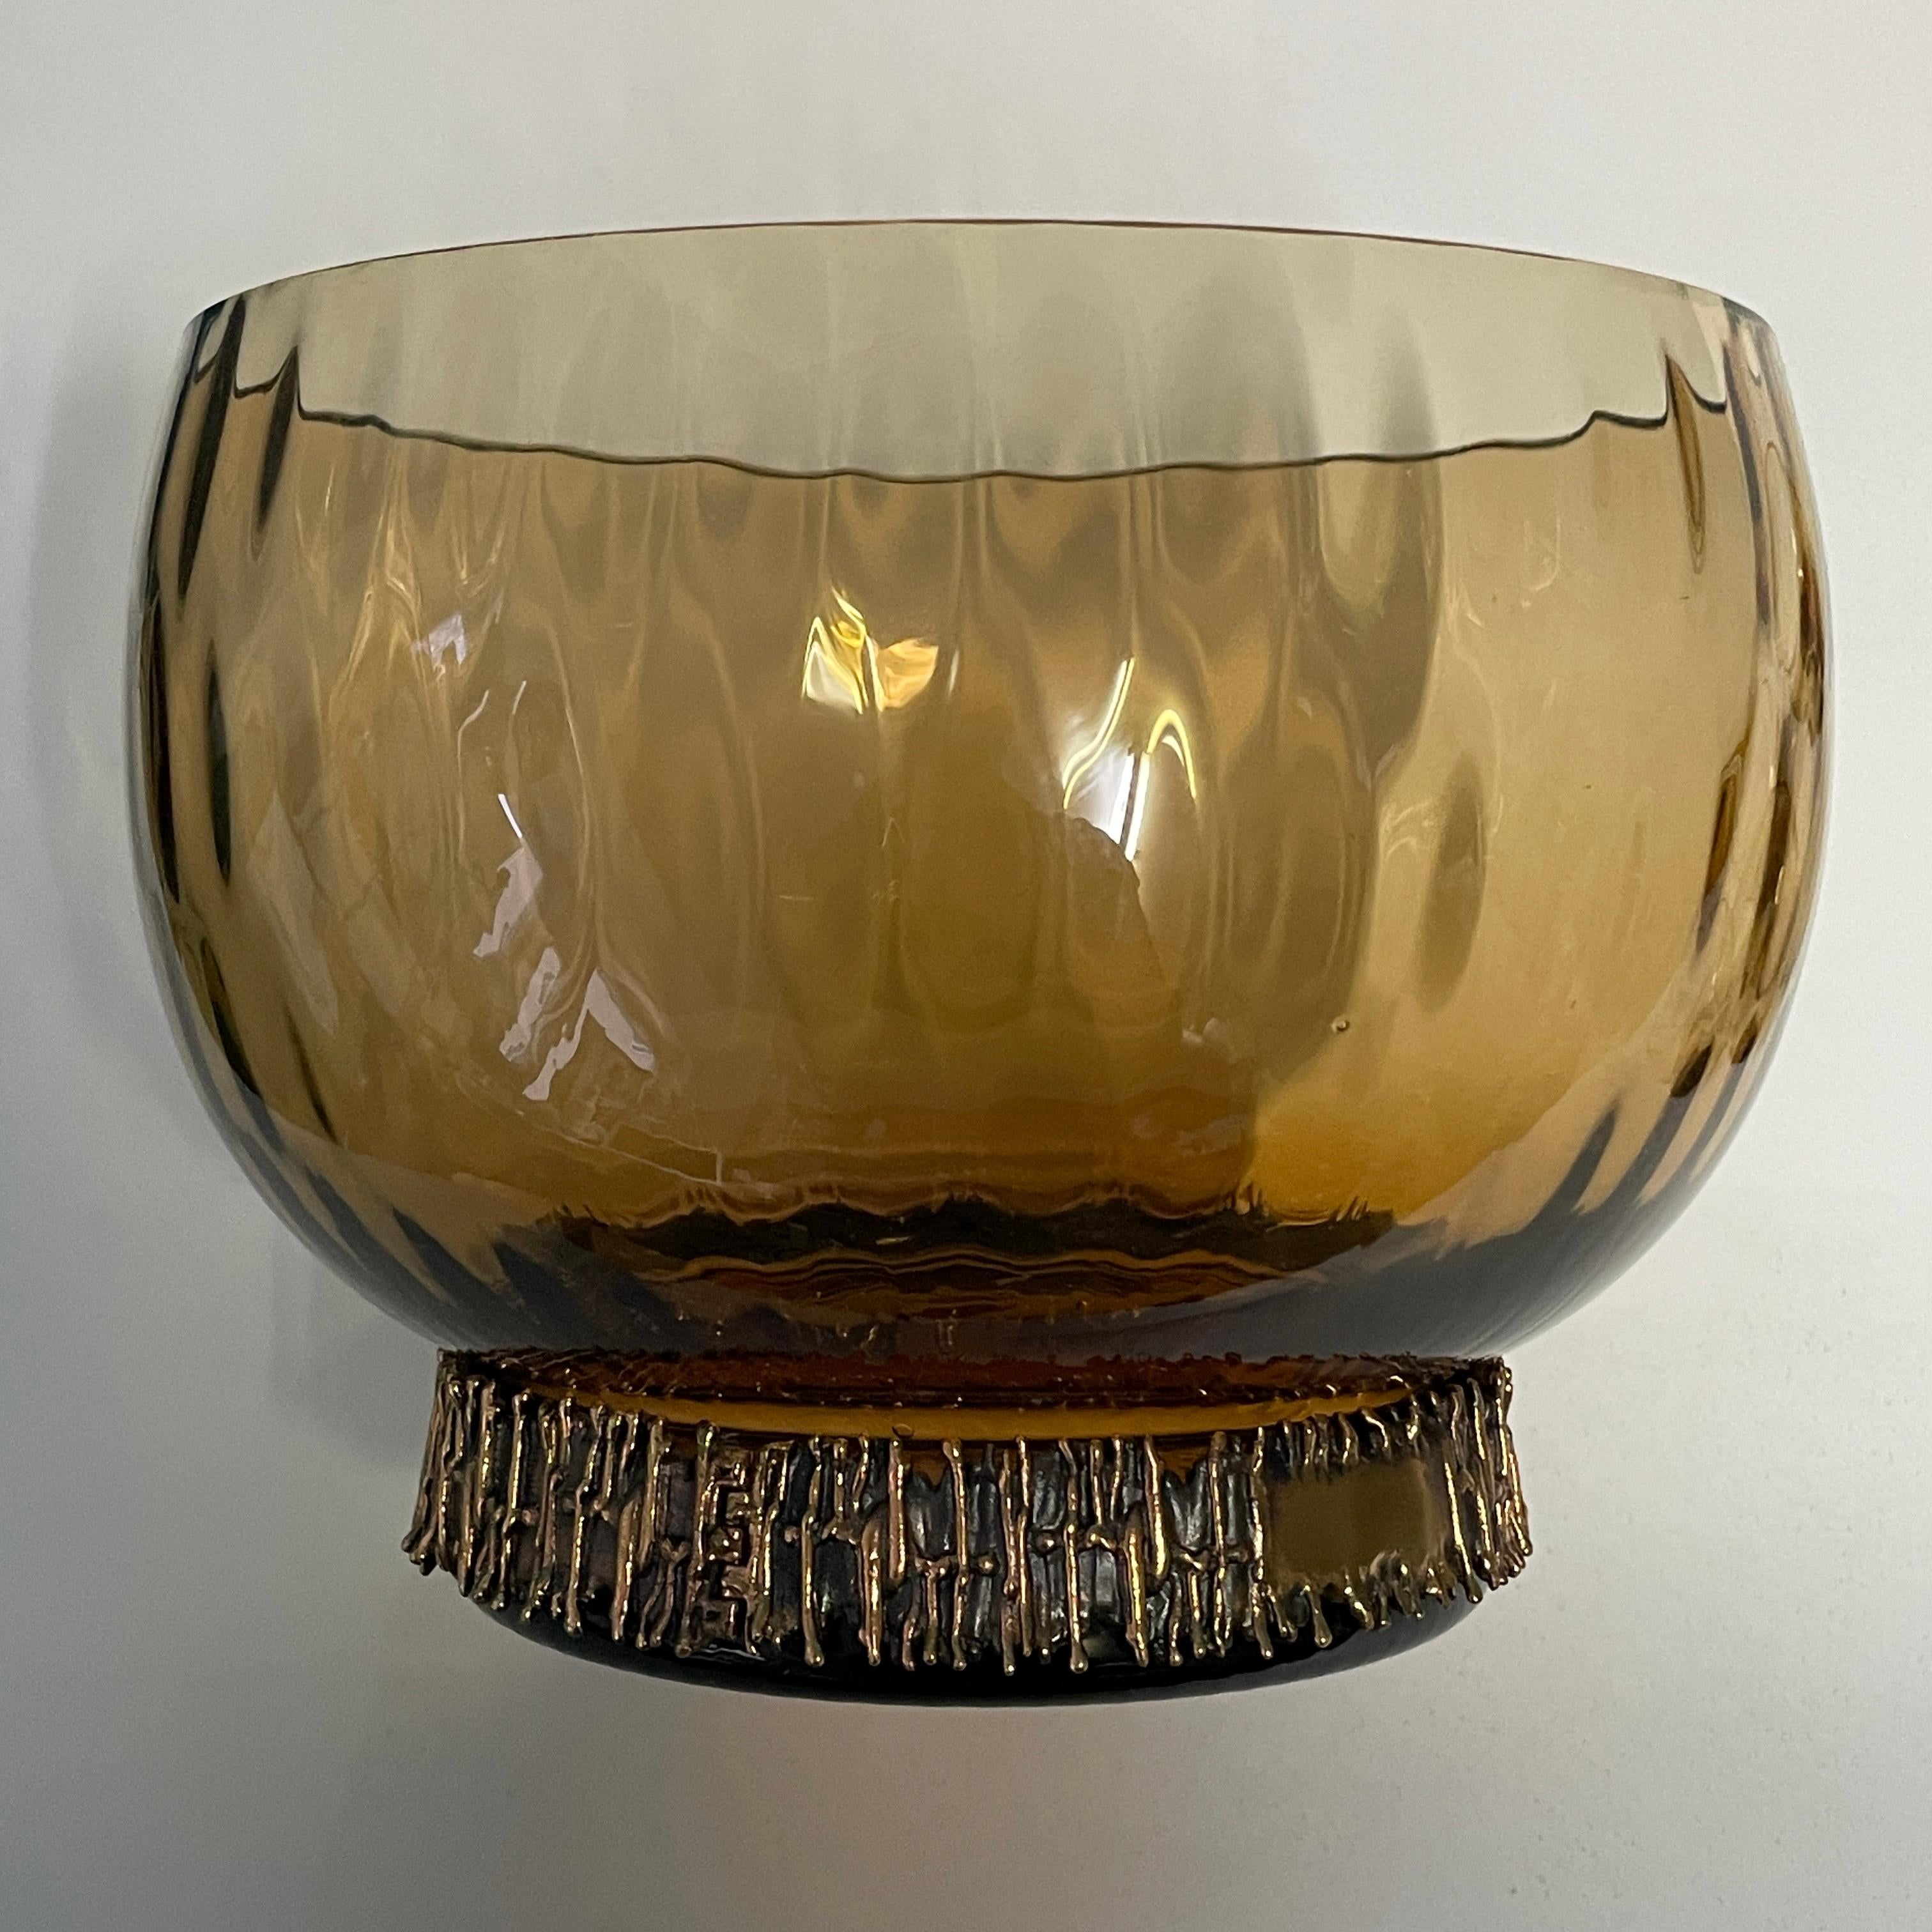 Bronze/Glass Bowl and 4pcs Punch Glasses from 1960s by Pentti Sarpaneva For Sale 5